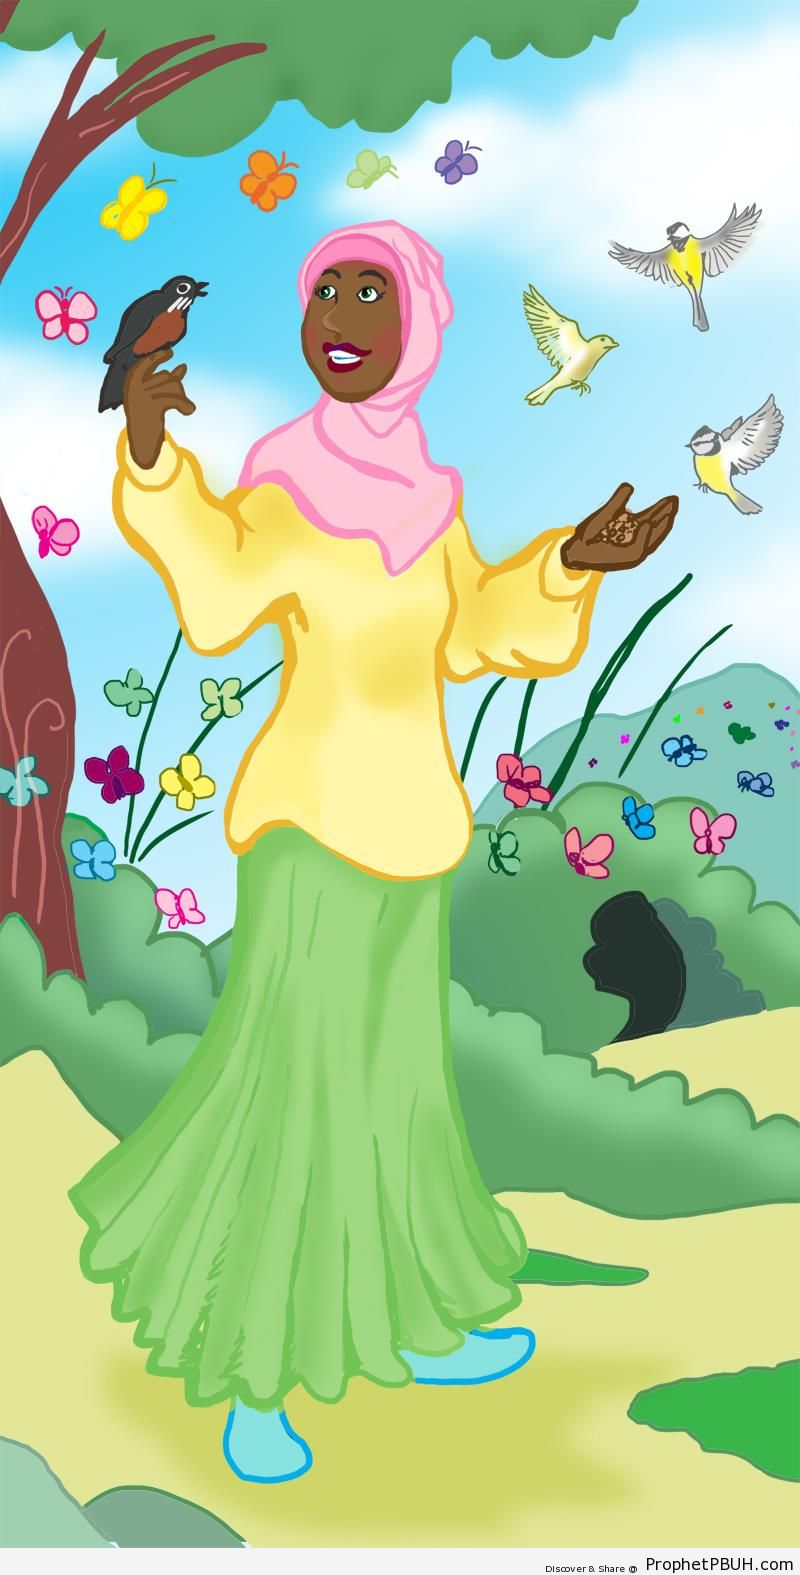 Dark Hijabi in Pink Hijab Surrounded by Birds [Drawing] - Drawings 